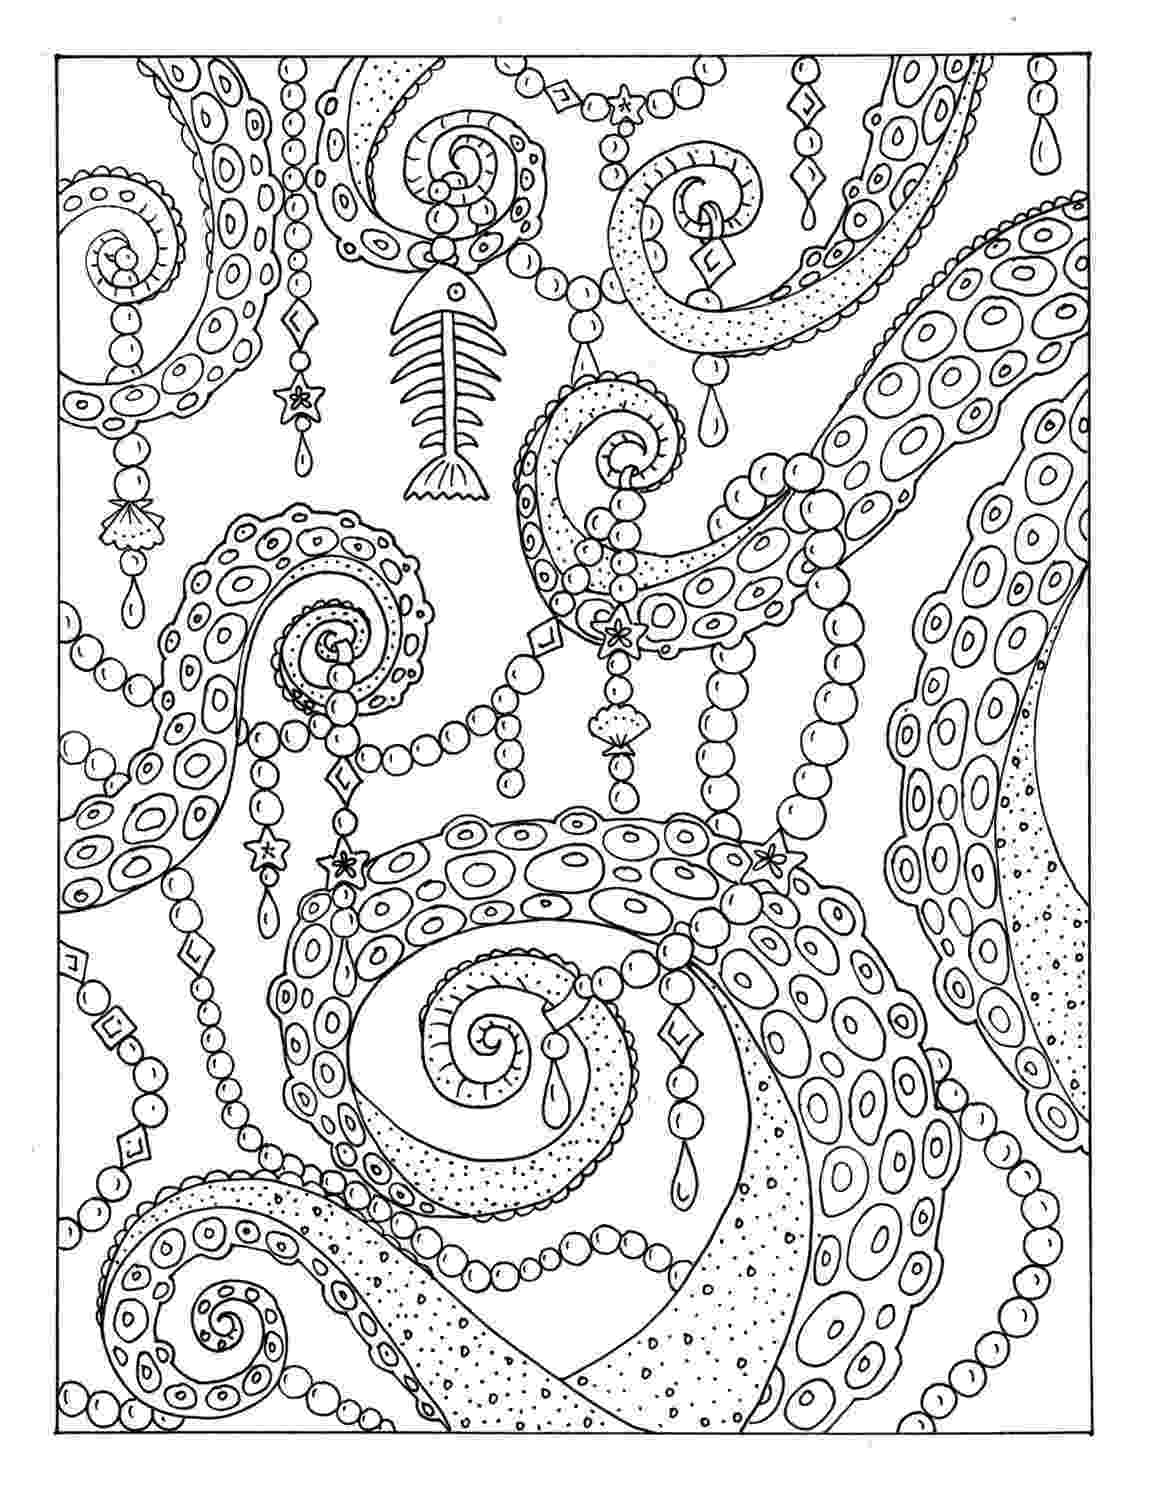 caps for sale coloring page 34 best caps for sale images on pinterest bottle caps coloring sale page for caps 